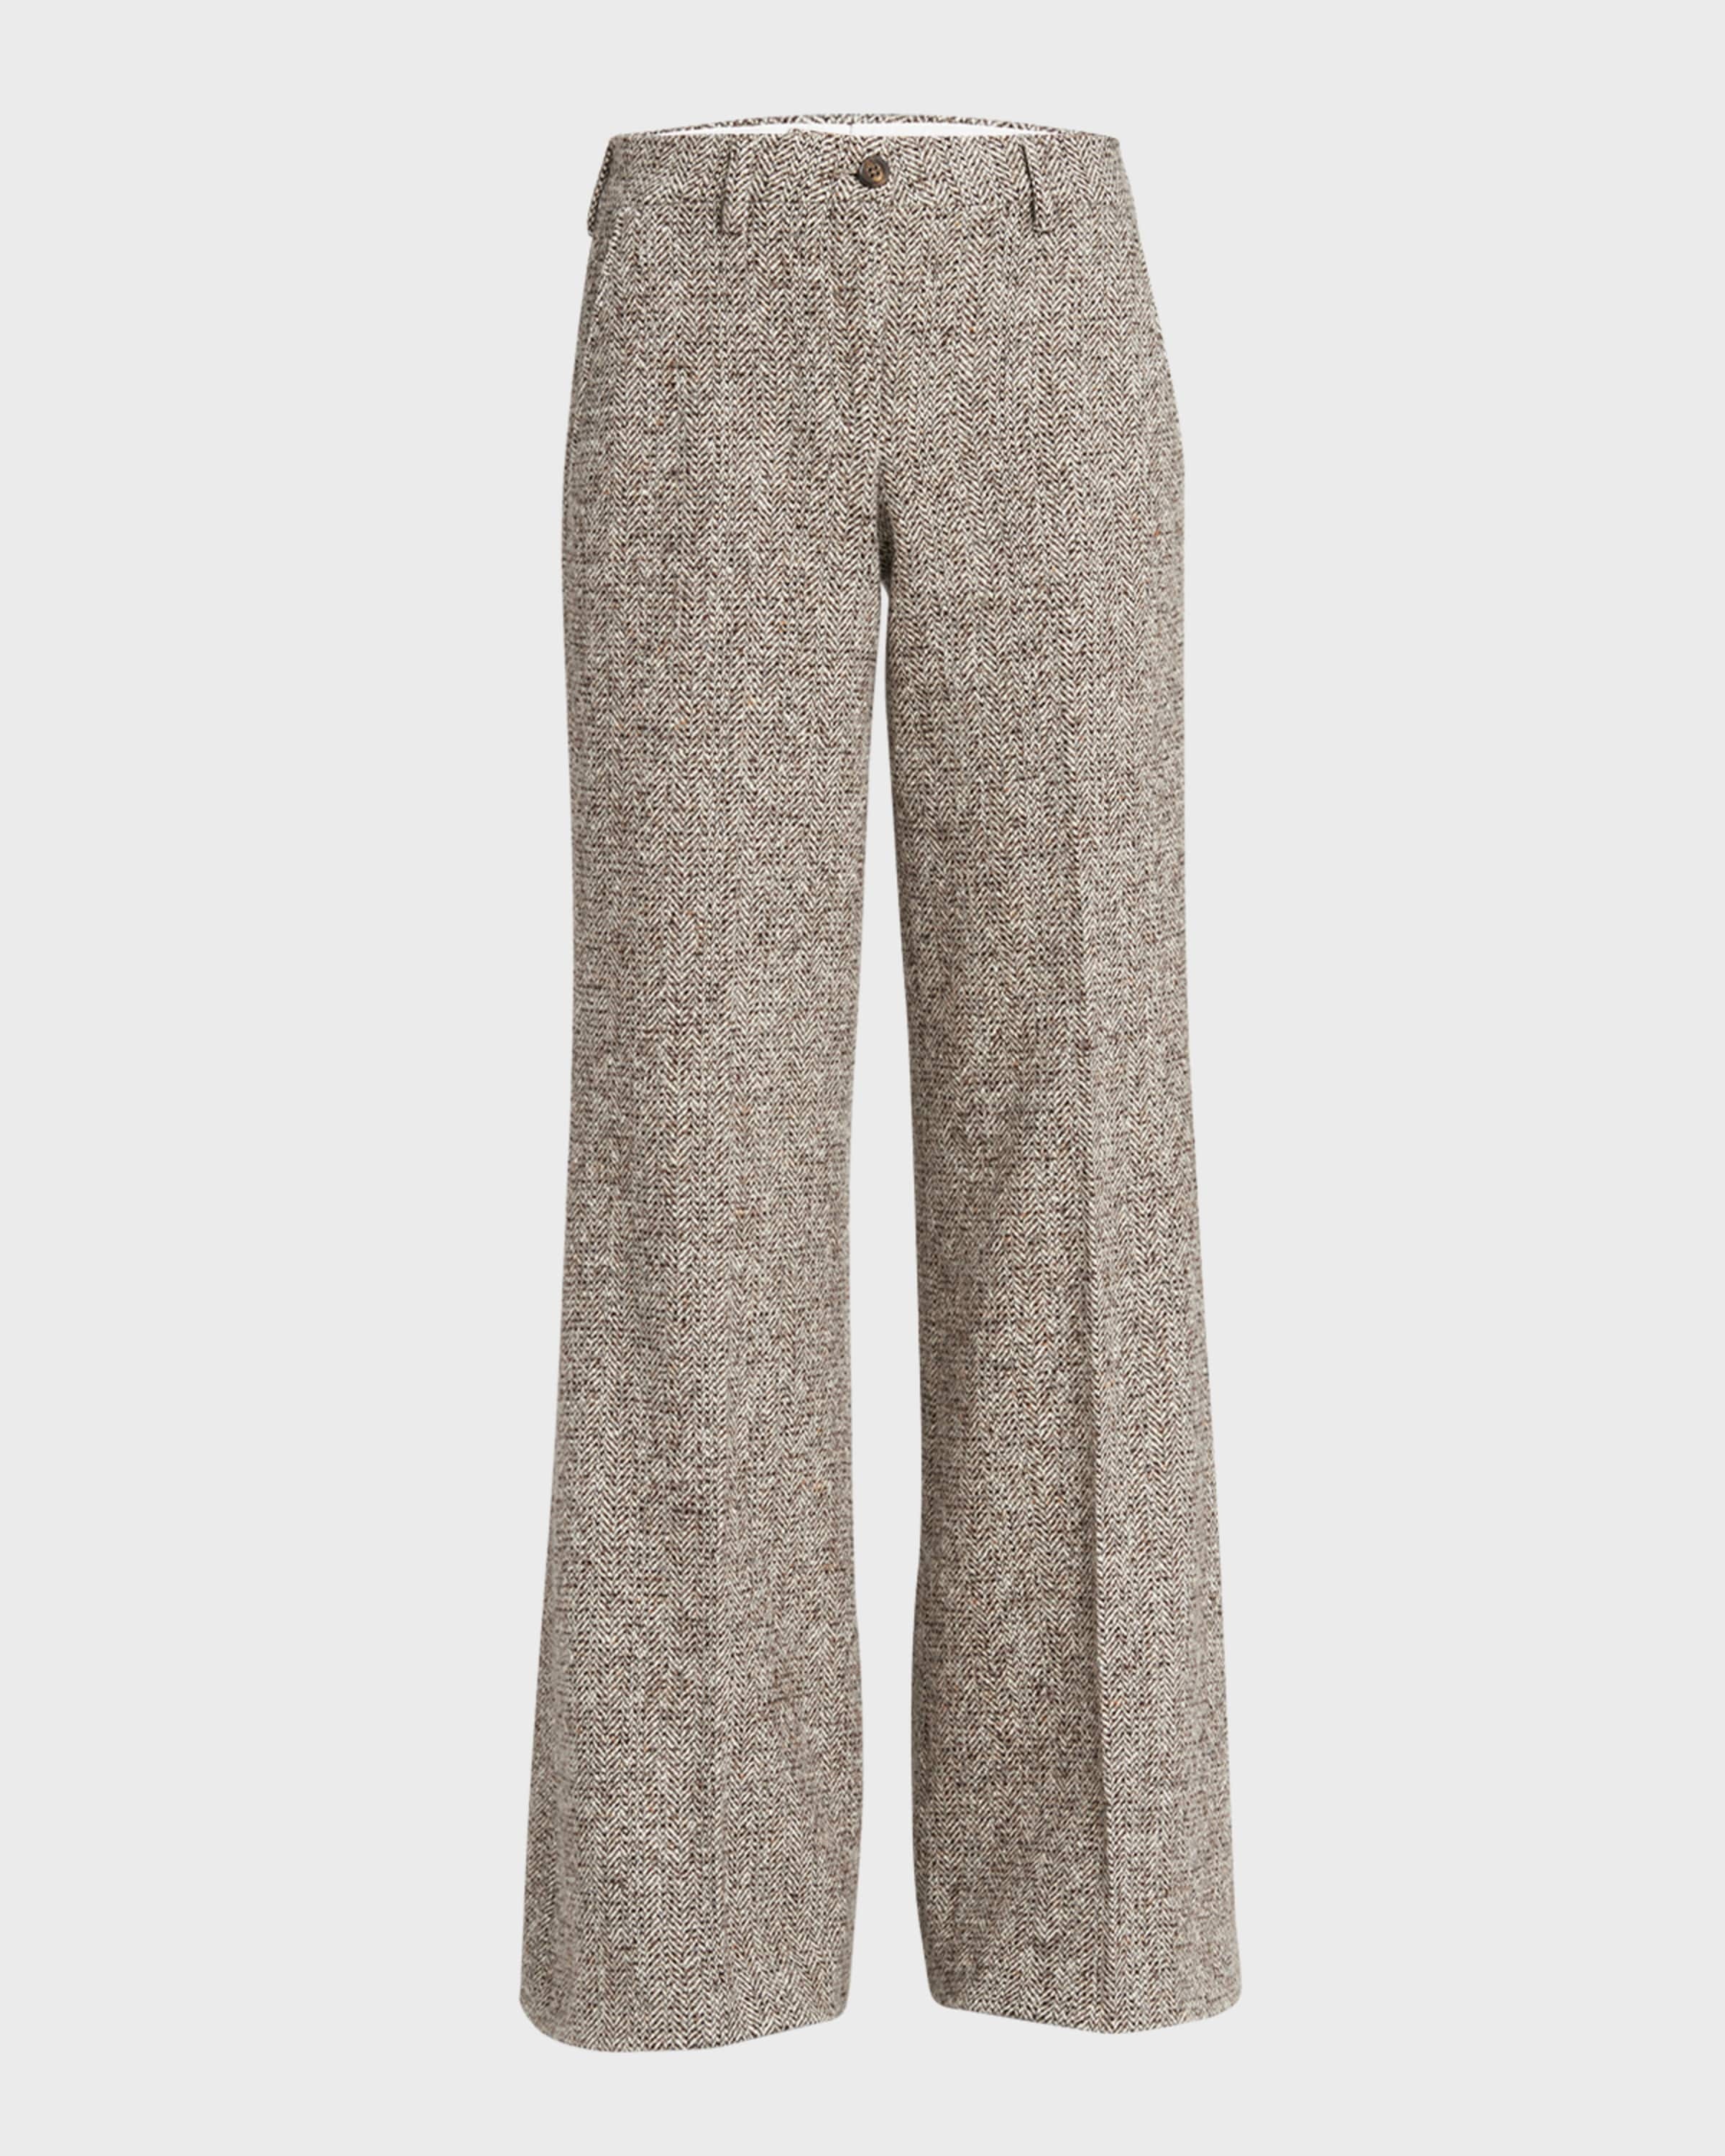 Women's pants in beige and brown wool and silk blend fabric